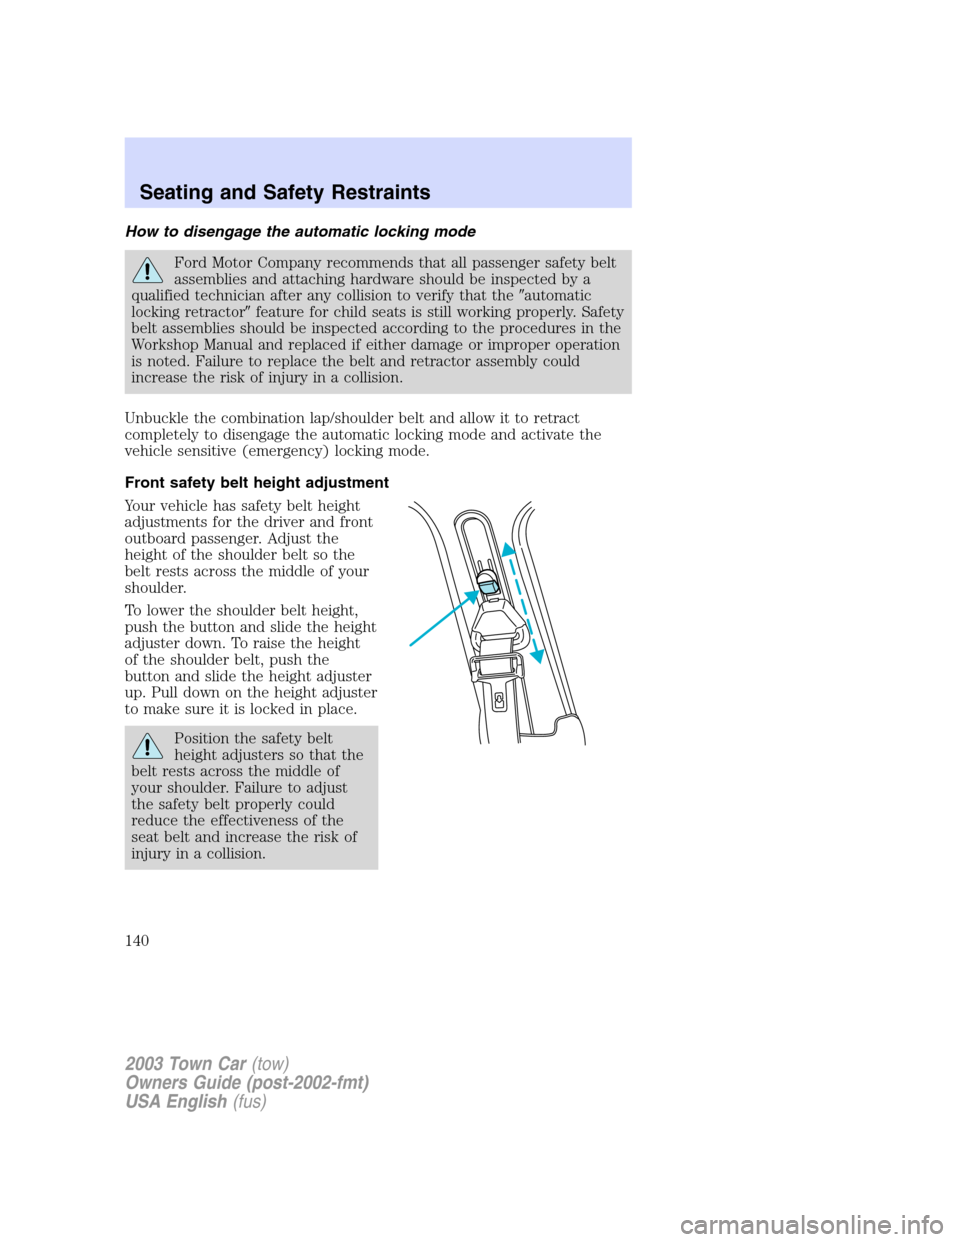 LINCOLN TOWN CAR 2003  Owners Manual How to disengage the automatic locking mode
Ford Motor Company recommends that all passenger safety belt
assemblies and attaching hardware should be inspected by a
qualified technician after any colli